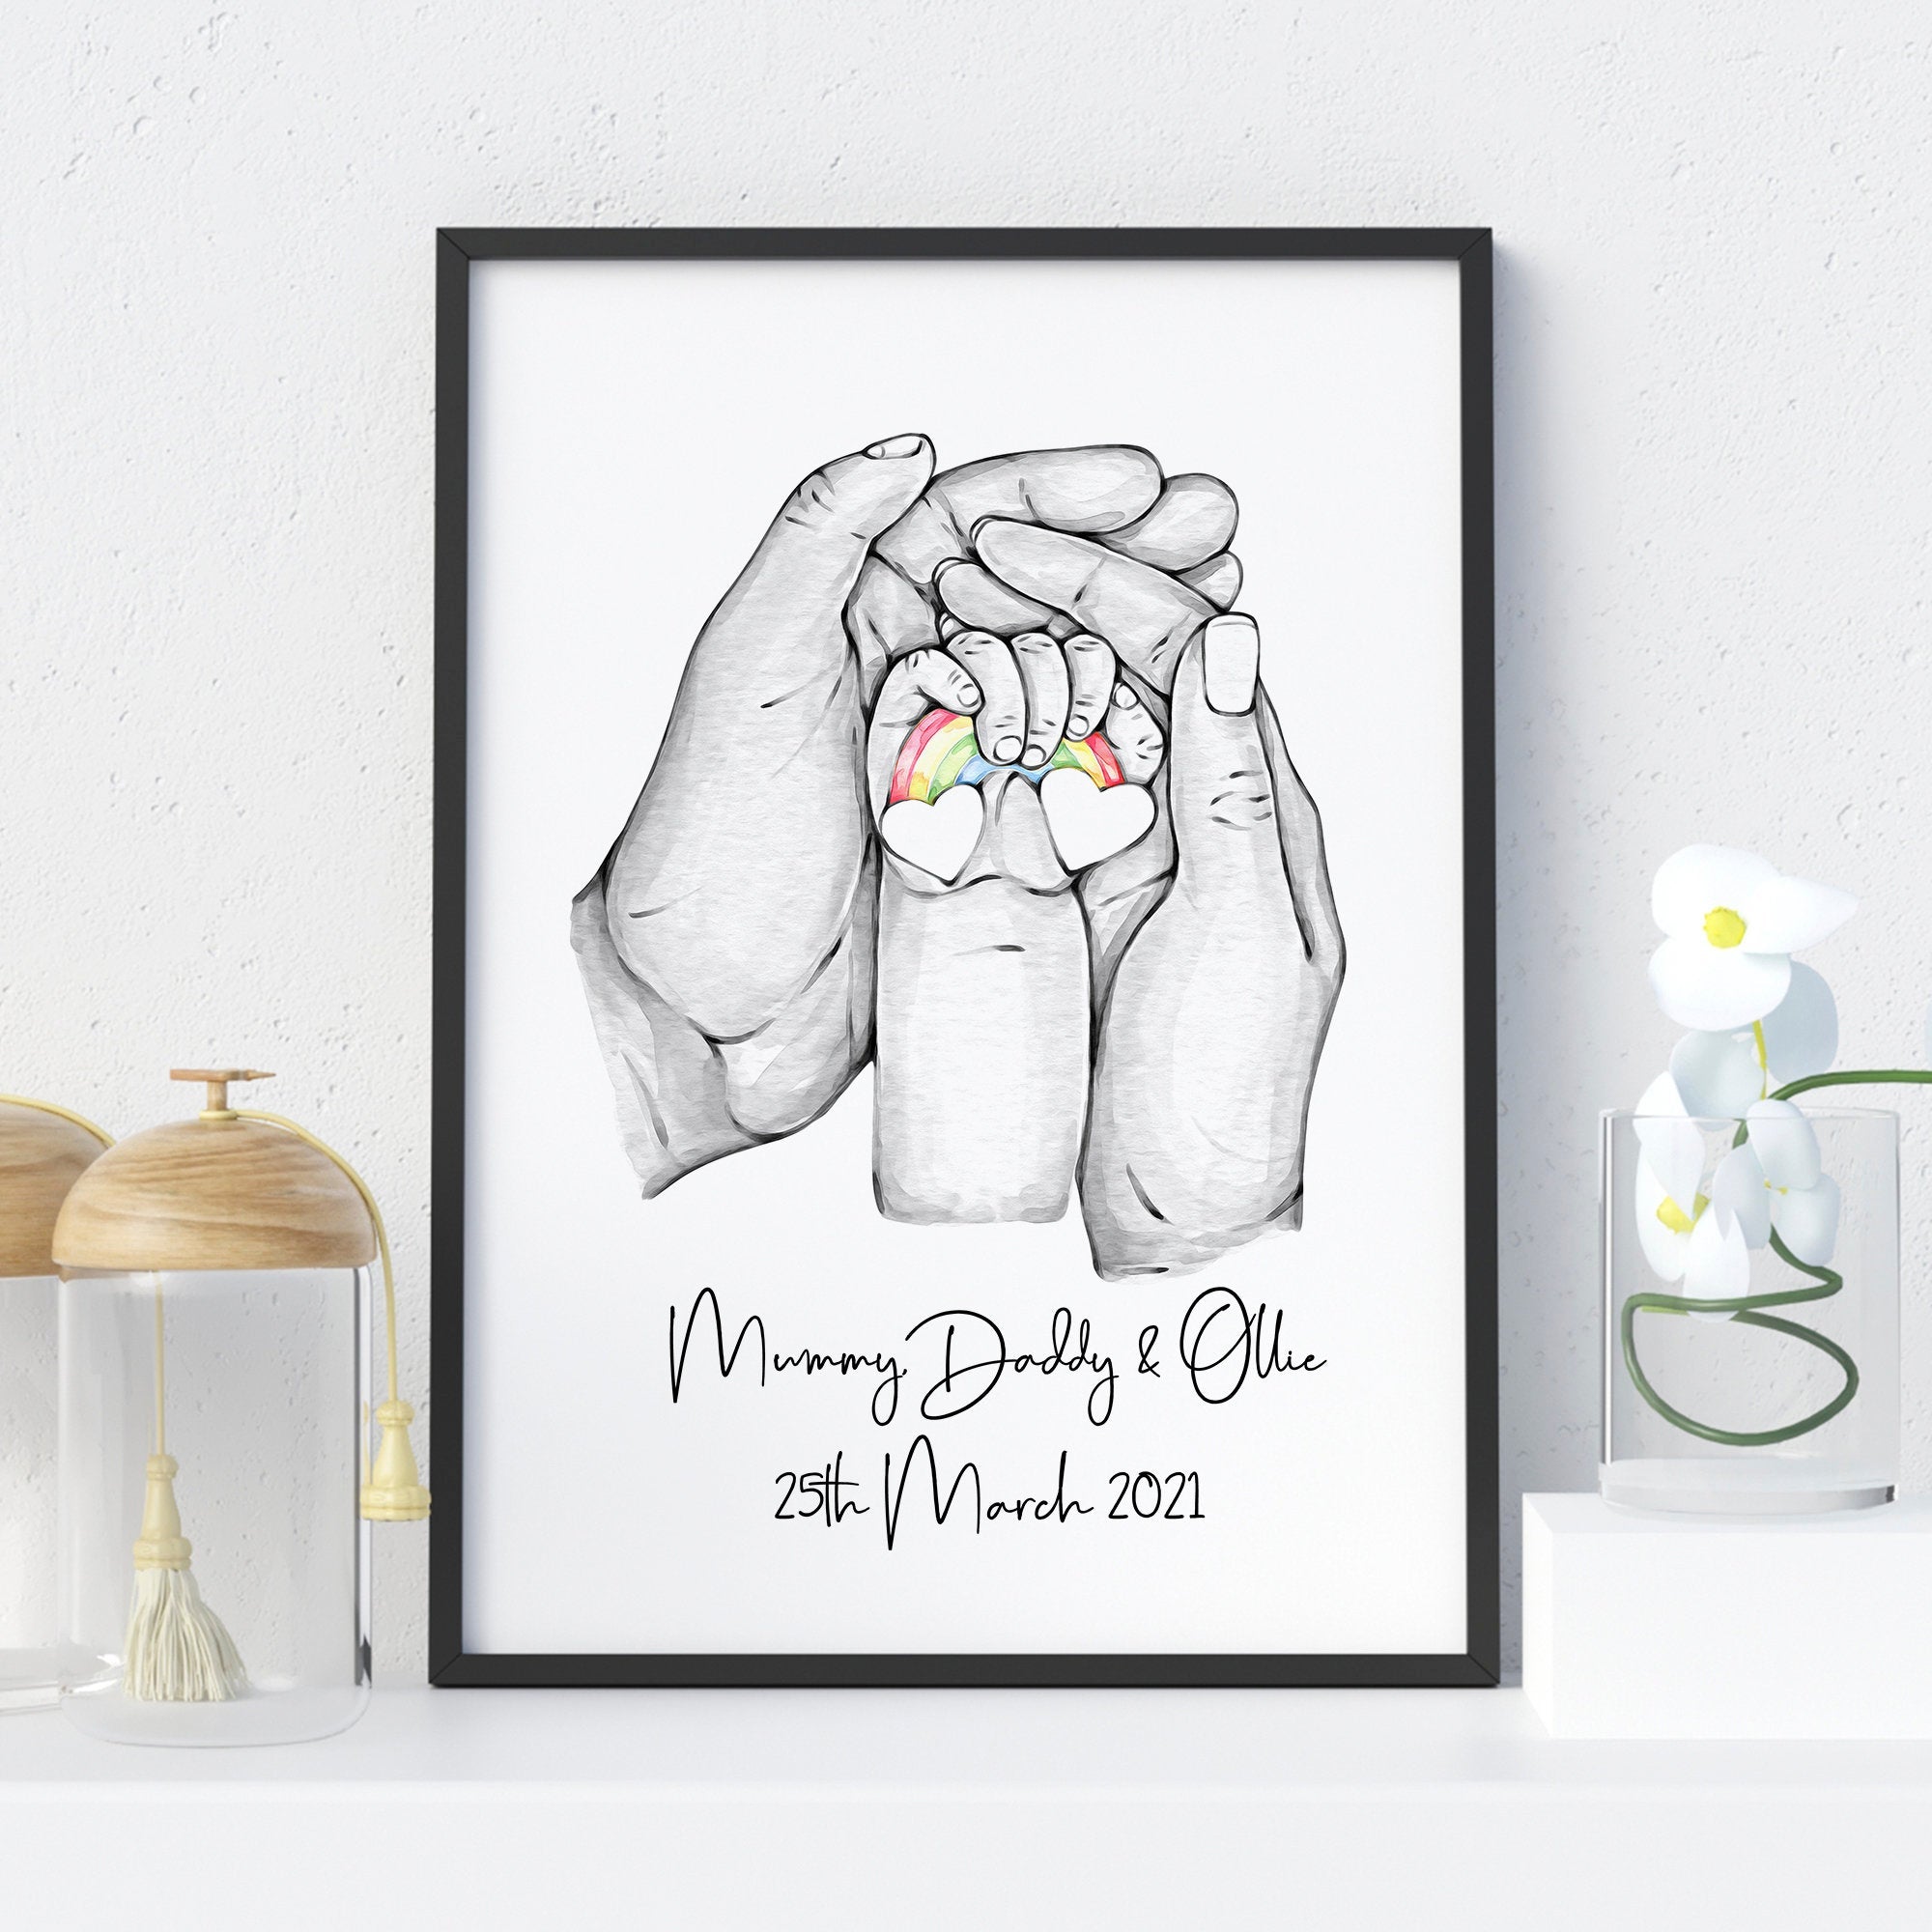 Personalised Child and Parent Rainbow Family Handprint Art - Hold upon Heart